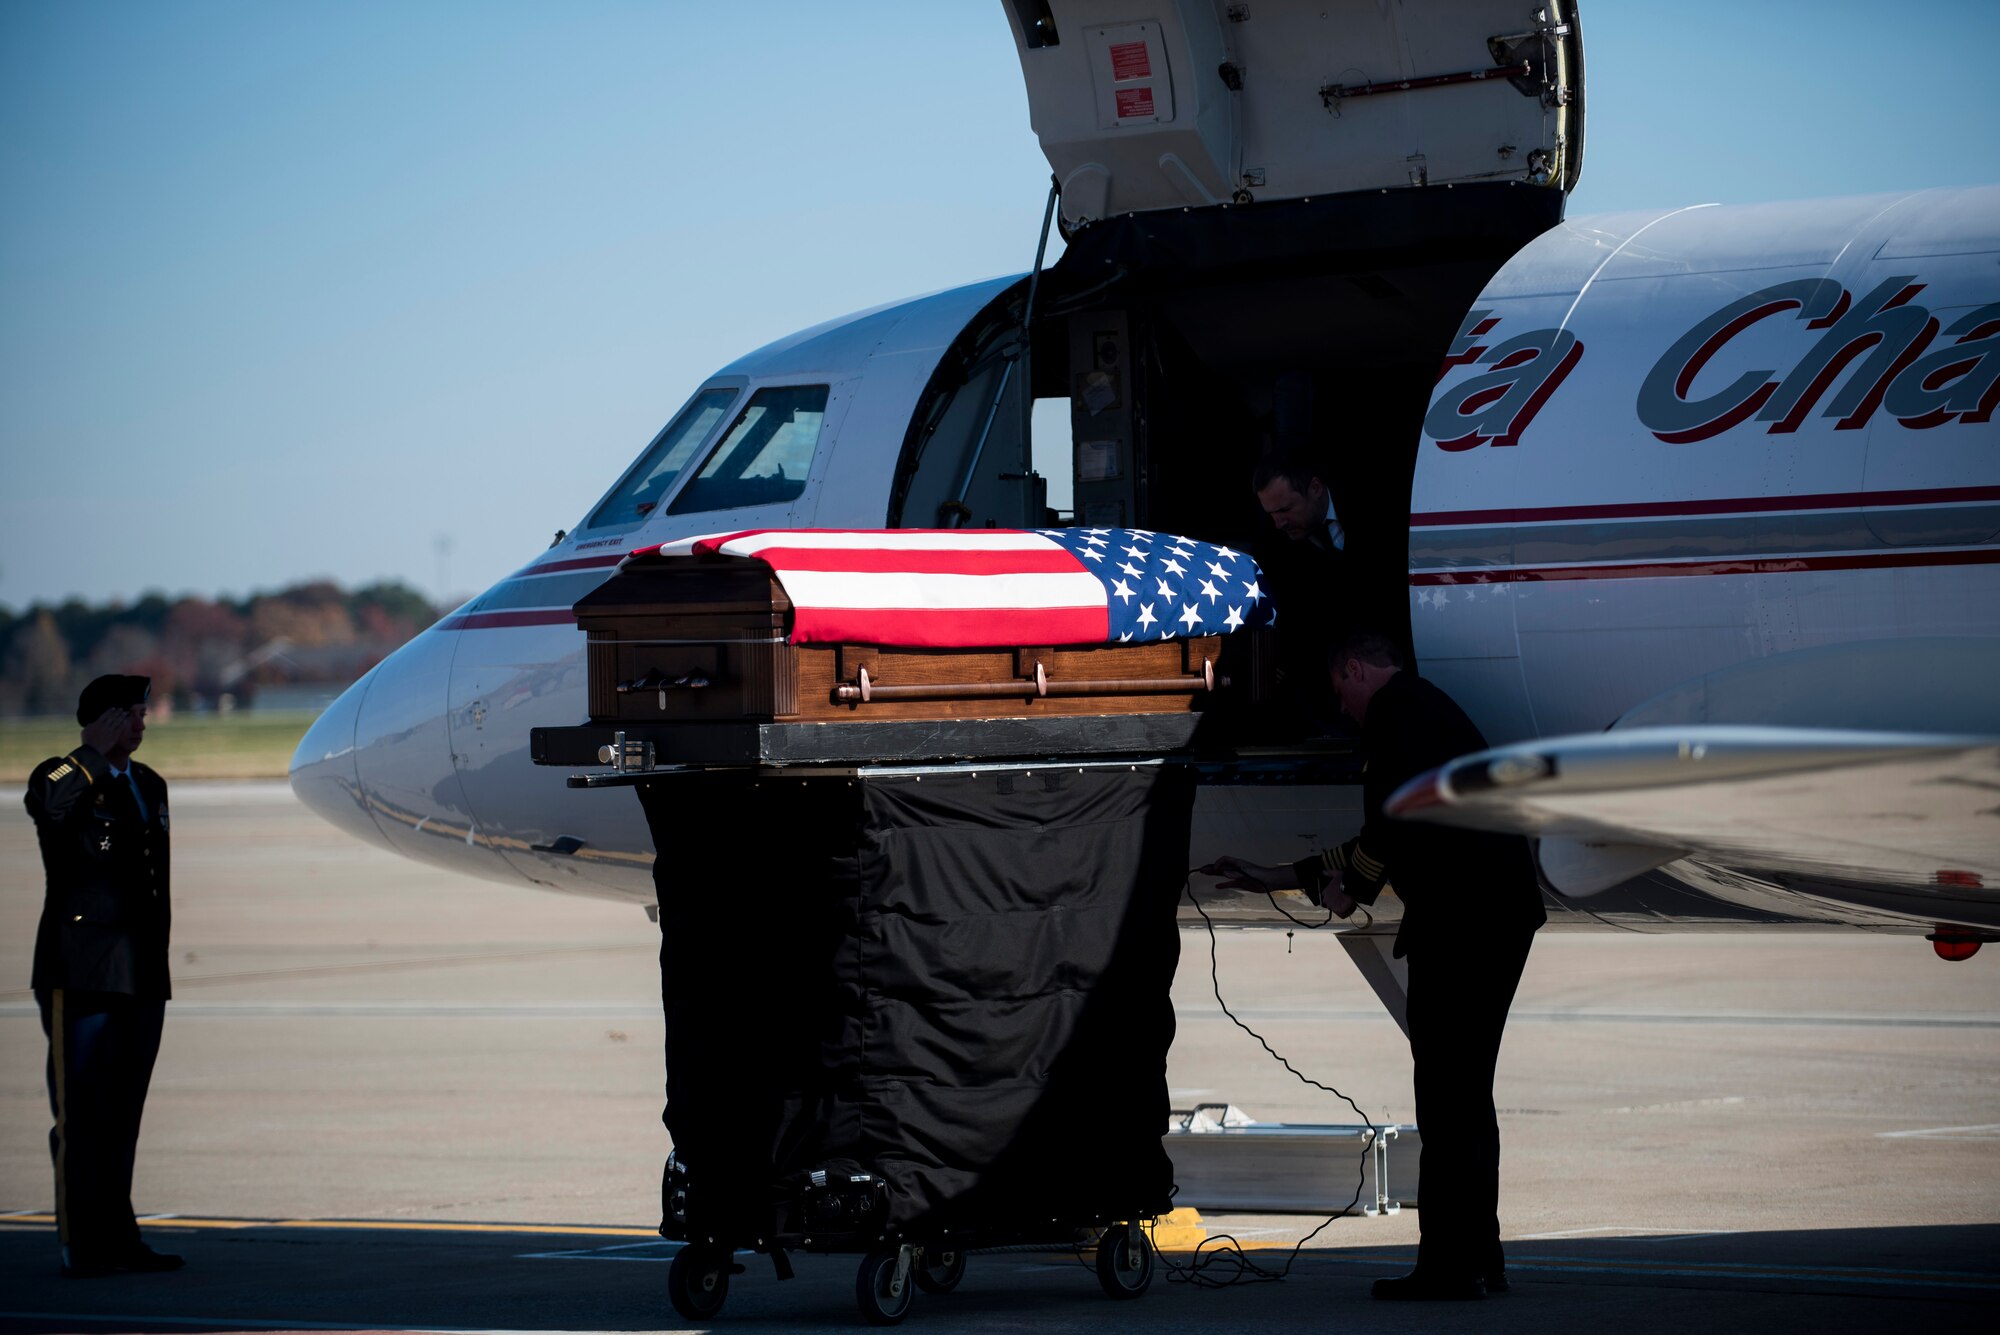 The remains of Pfc. Tyler Iubelt are lowered from a plane during his dignified transfer ceremony 21 Nov., 2016, at Scott Air Force Base, Illinois. Iubelt passed away on 12 Nov. while deployed to Bagram, Afghanistan. (U.S. Air Force photo by Staff Sgt. Clayton Lenhardt)